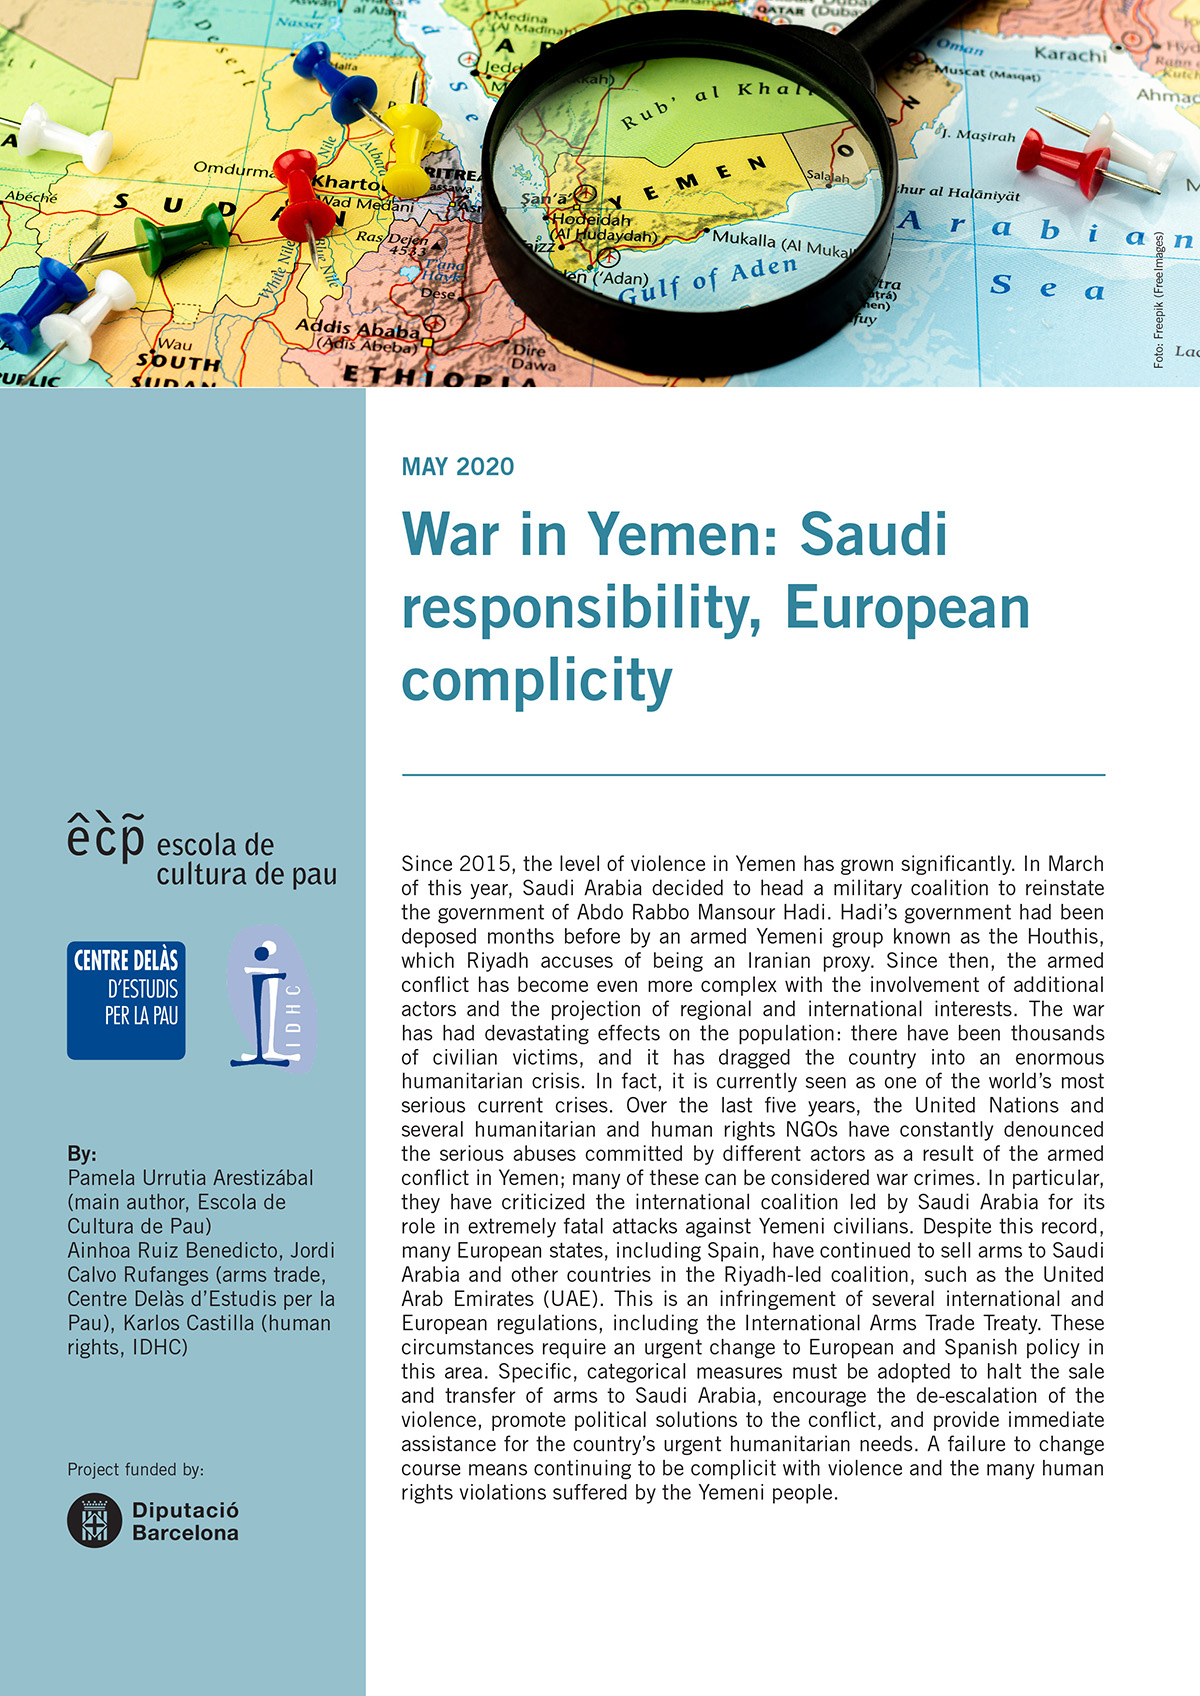 Policy Paper from ECP, IDHC and Centre Delàs: “War in Yemen: Saudi responsibility, European complicity”